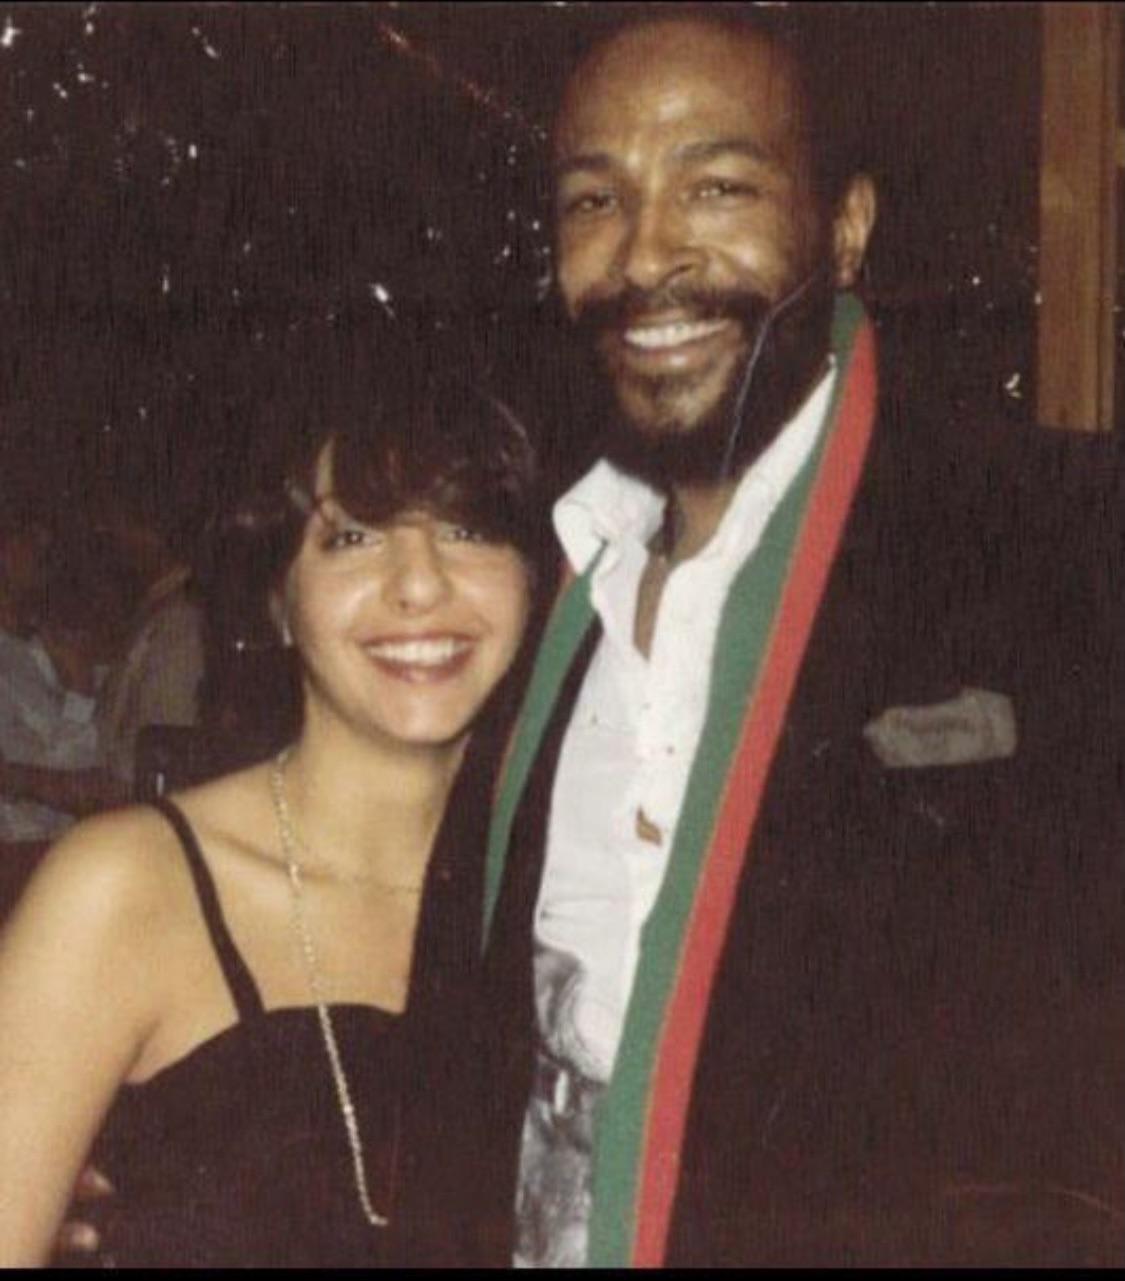 My auntie with Marvin Gaye, Stringfellows nightclub in London, 1981.